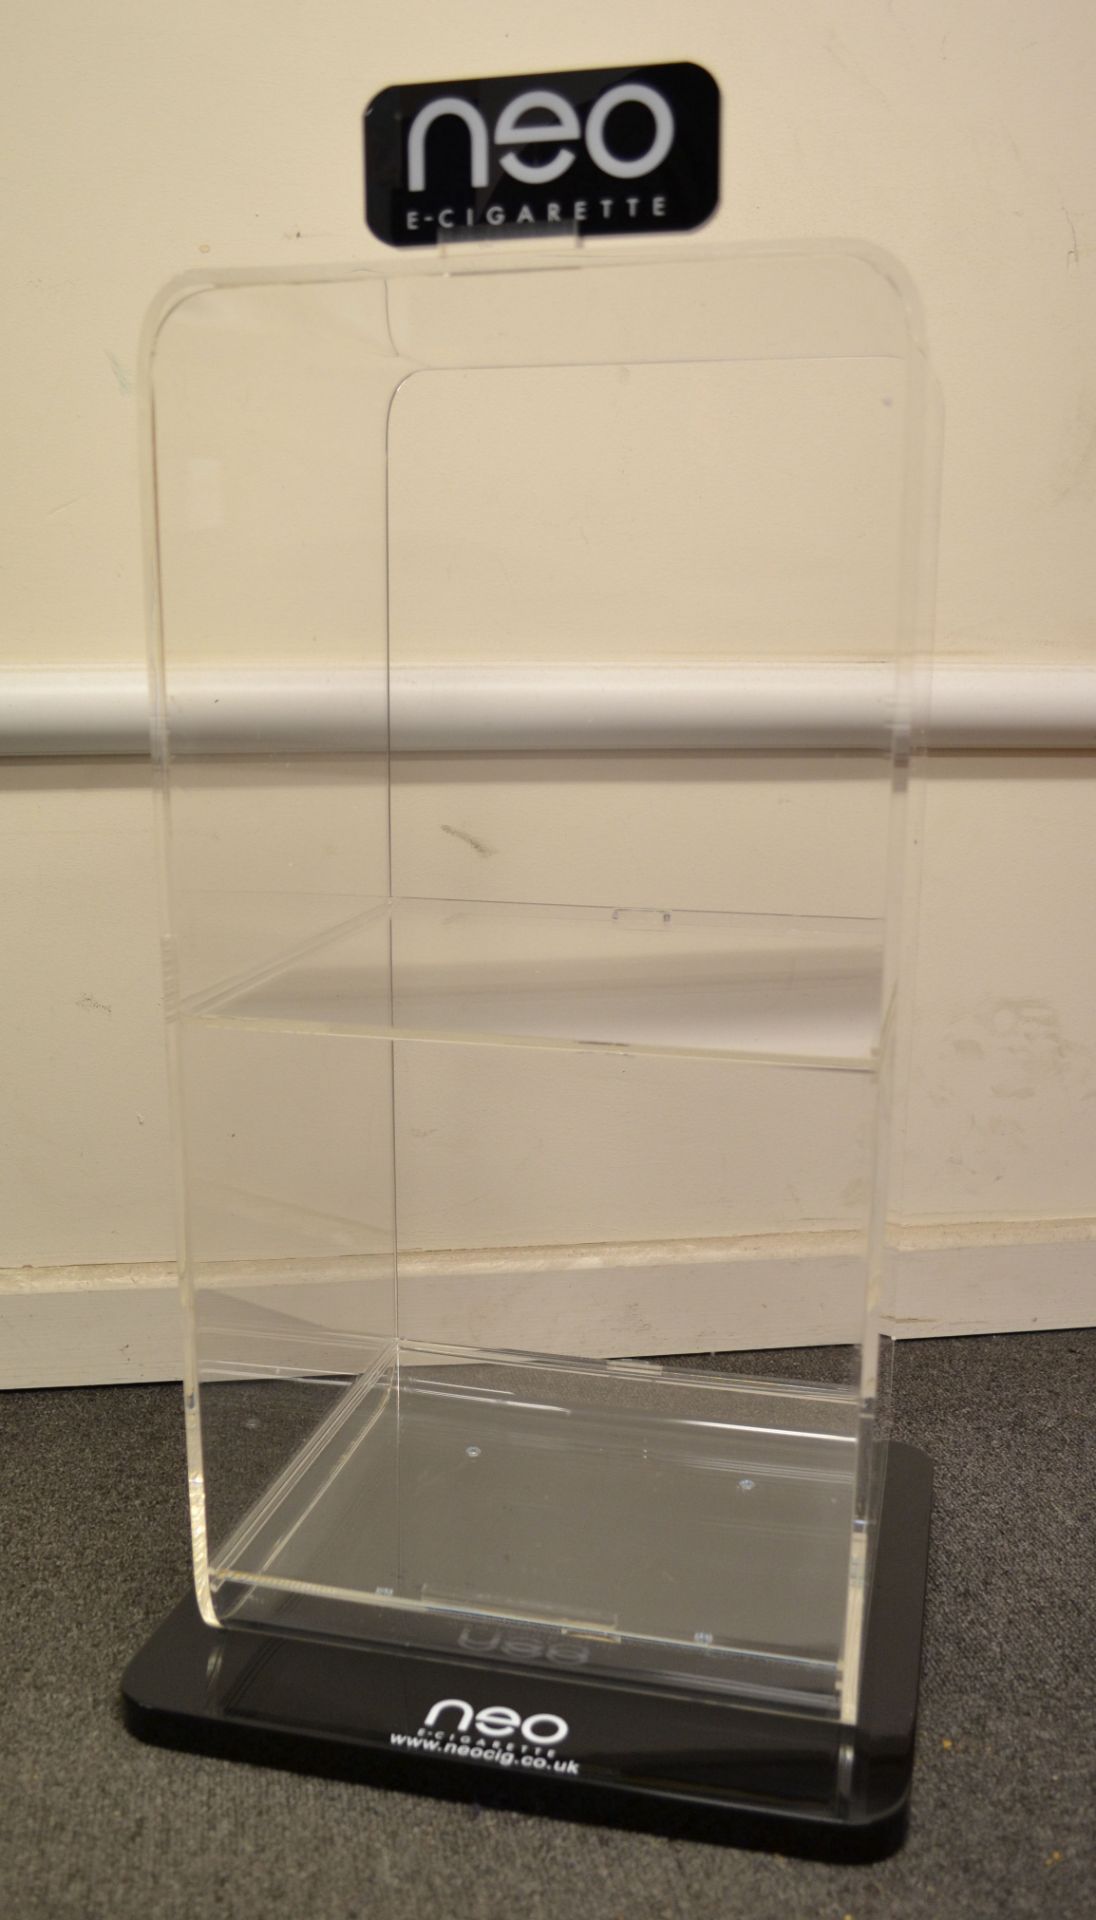 1 x Acrylic Counter Top Display Unit - New & Boxed - CL185 - Ref: DRTNEODSPLY - Location: Stoke ST3